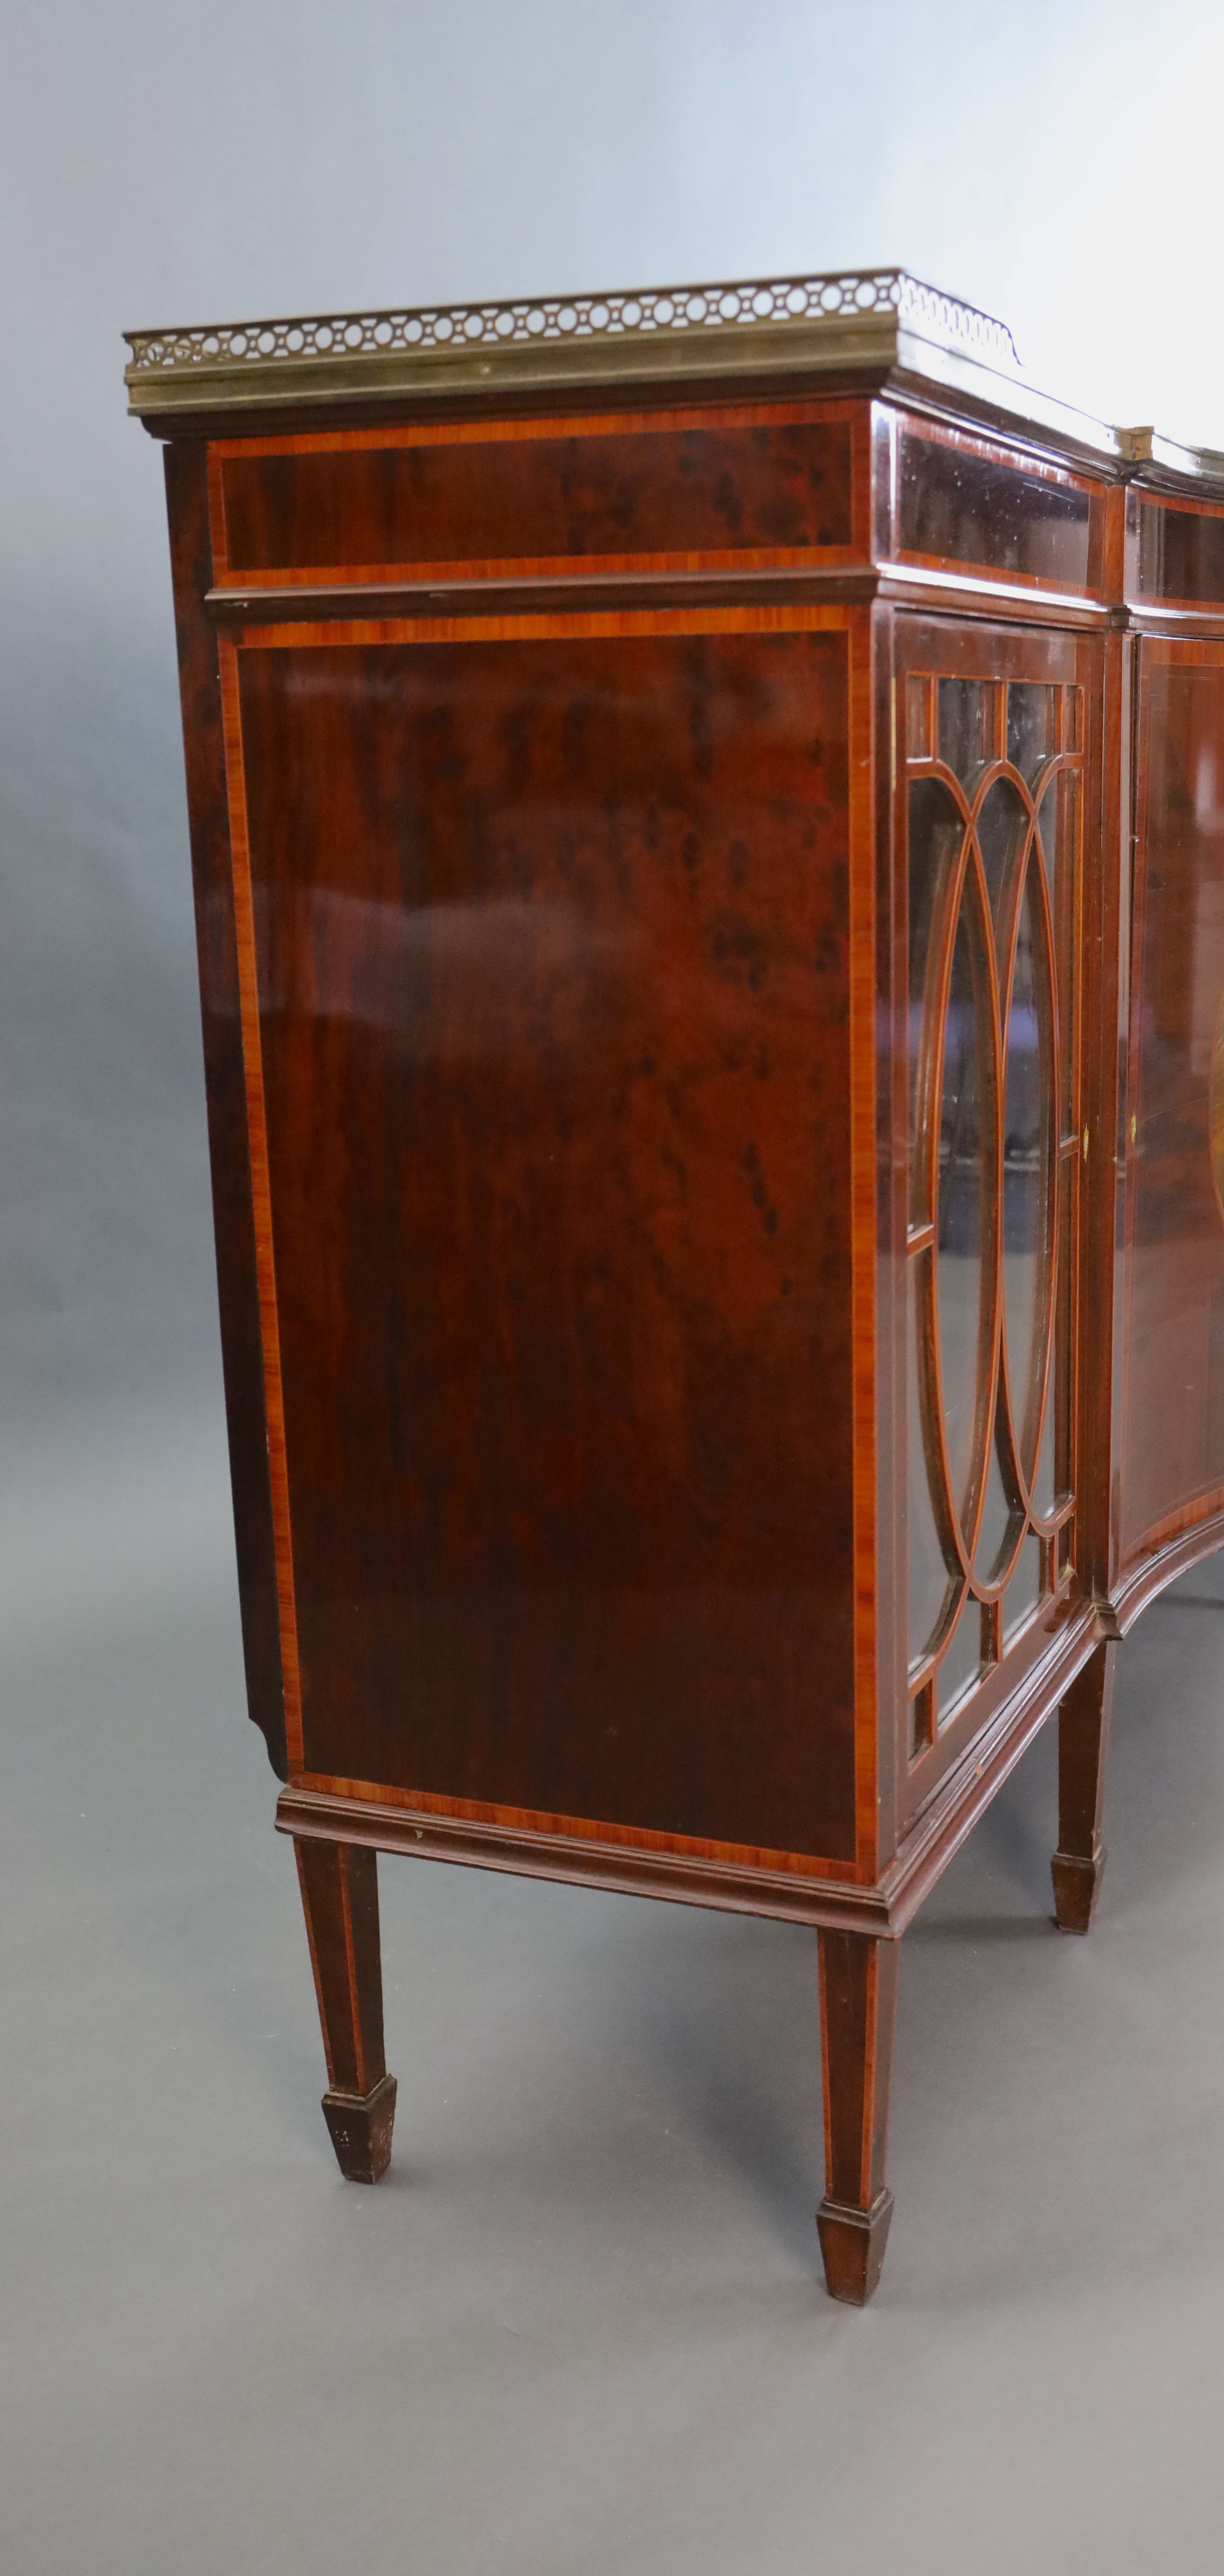 An Edwardian rosewood banded mahogany serpentine dwarf bookcase, W.5ft 1.5in. D.1ft 6in. H.3ft 3in.